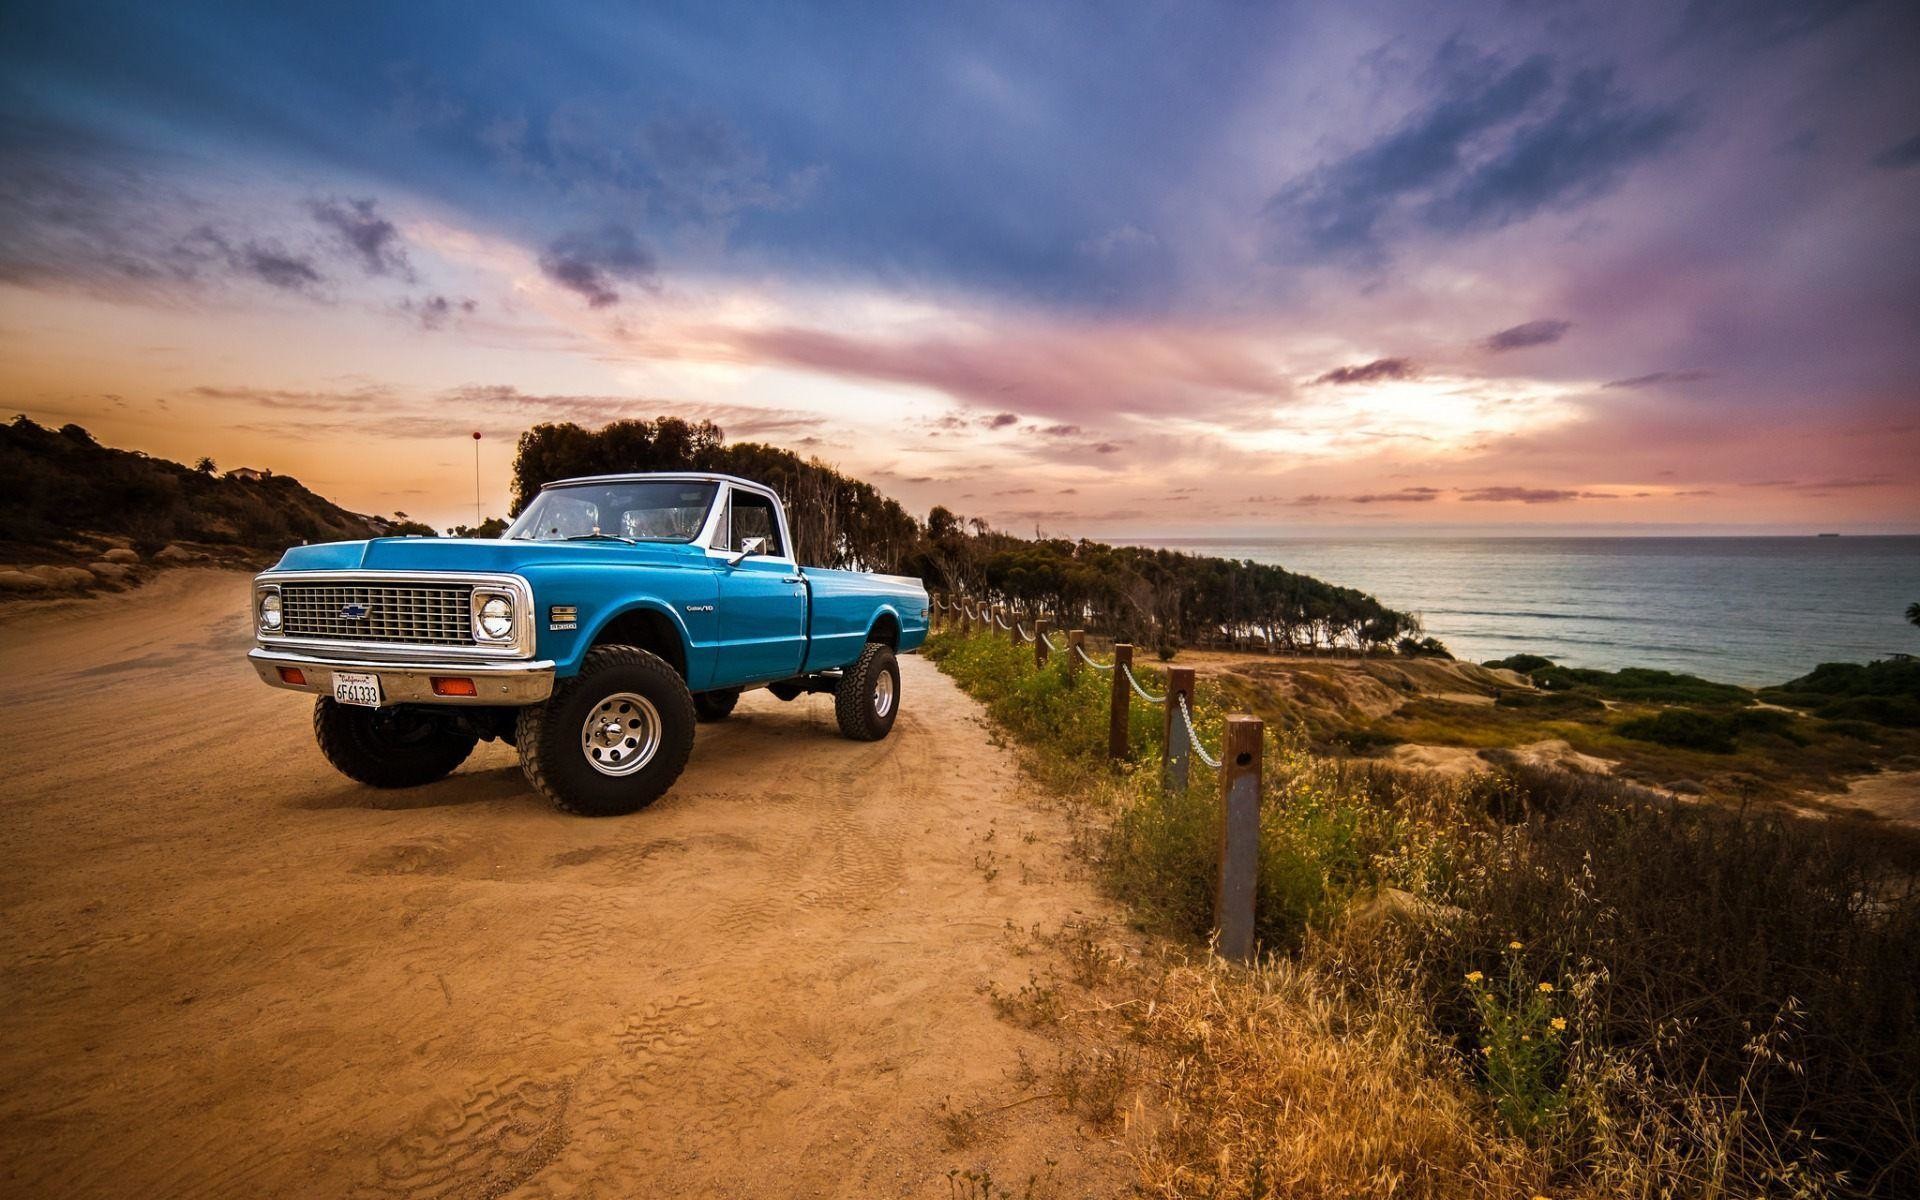 Chevy Truck Wallpapers Wallpaper Cave